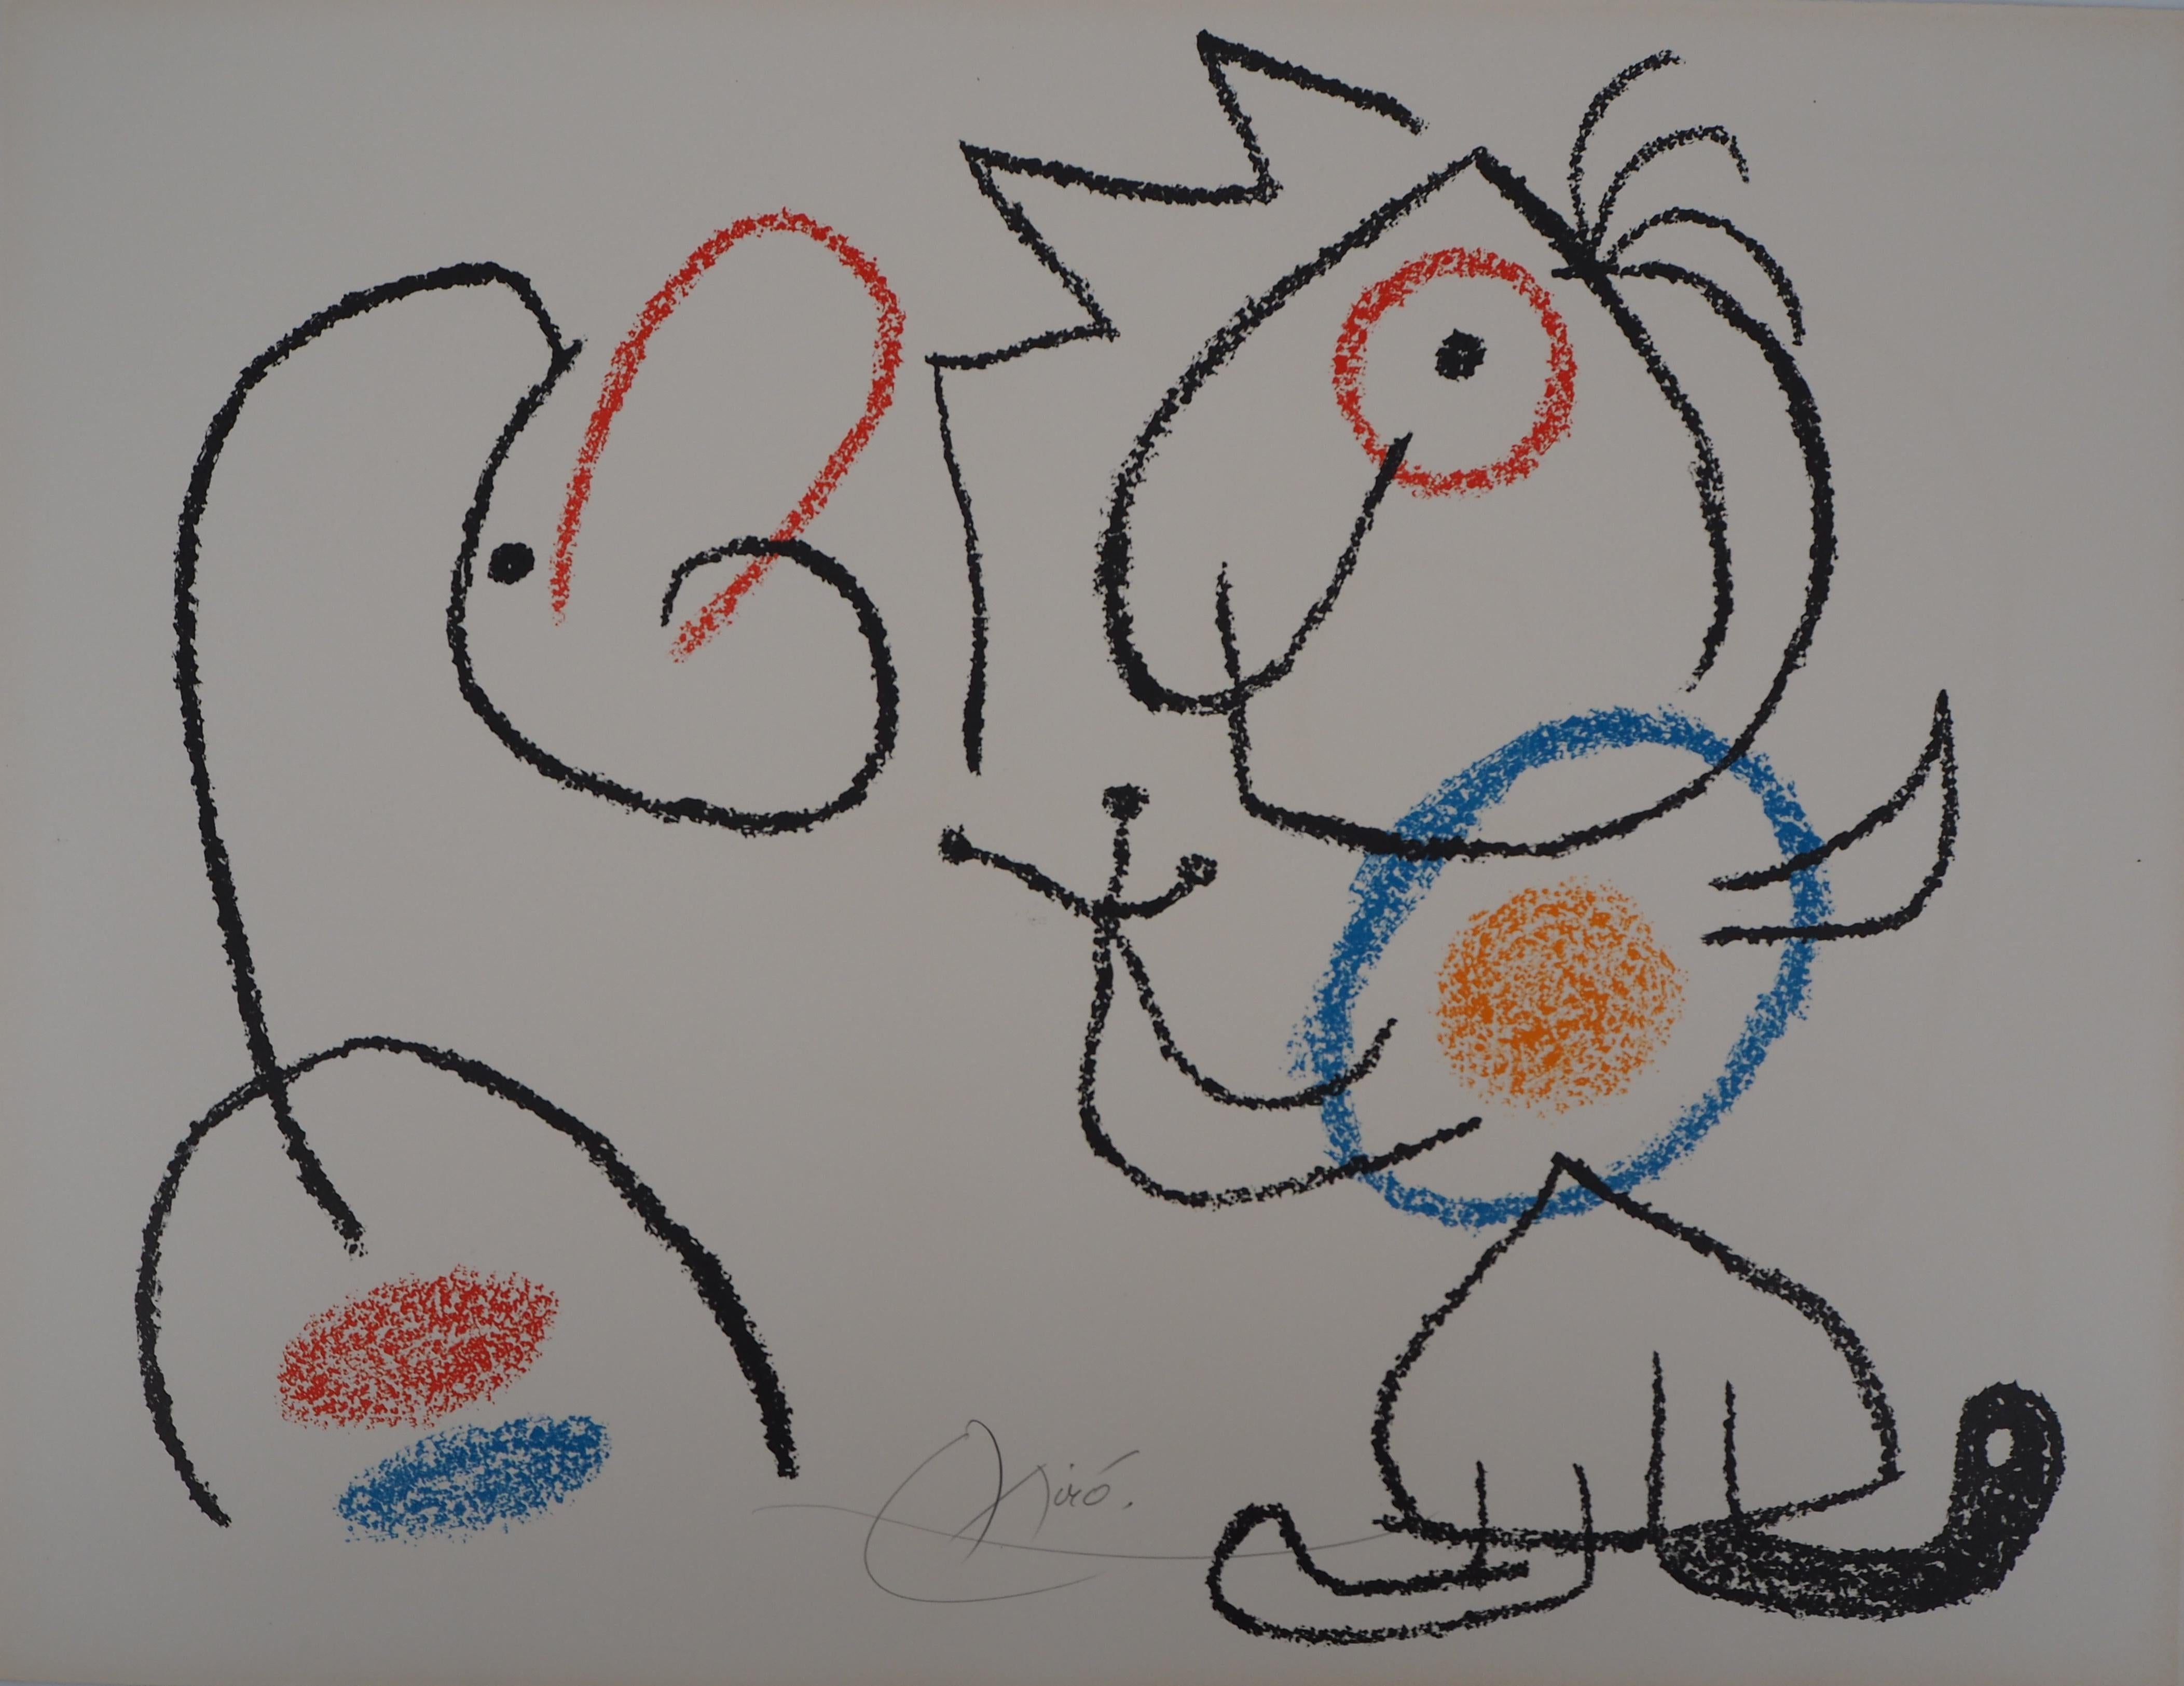 Joan Miró Abstract Print - Ubu : King and Man Speaking - Original Handsigned Lithograph - Mourlot, 1971